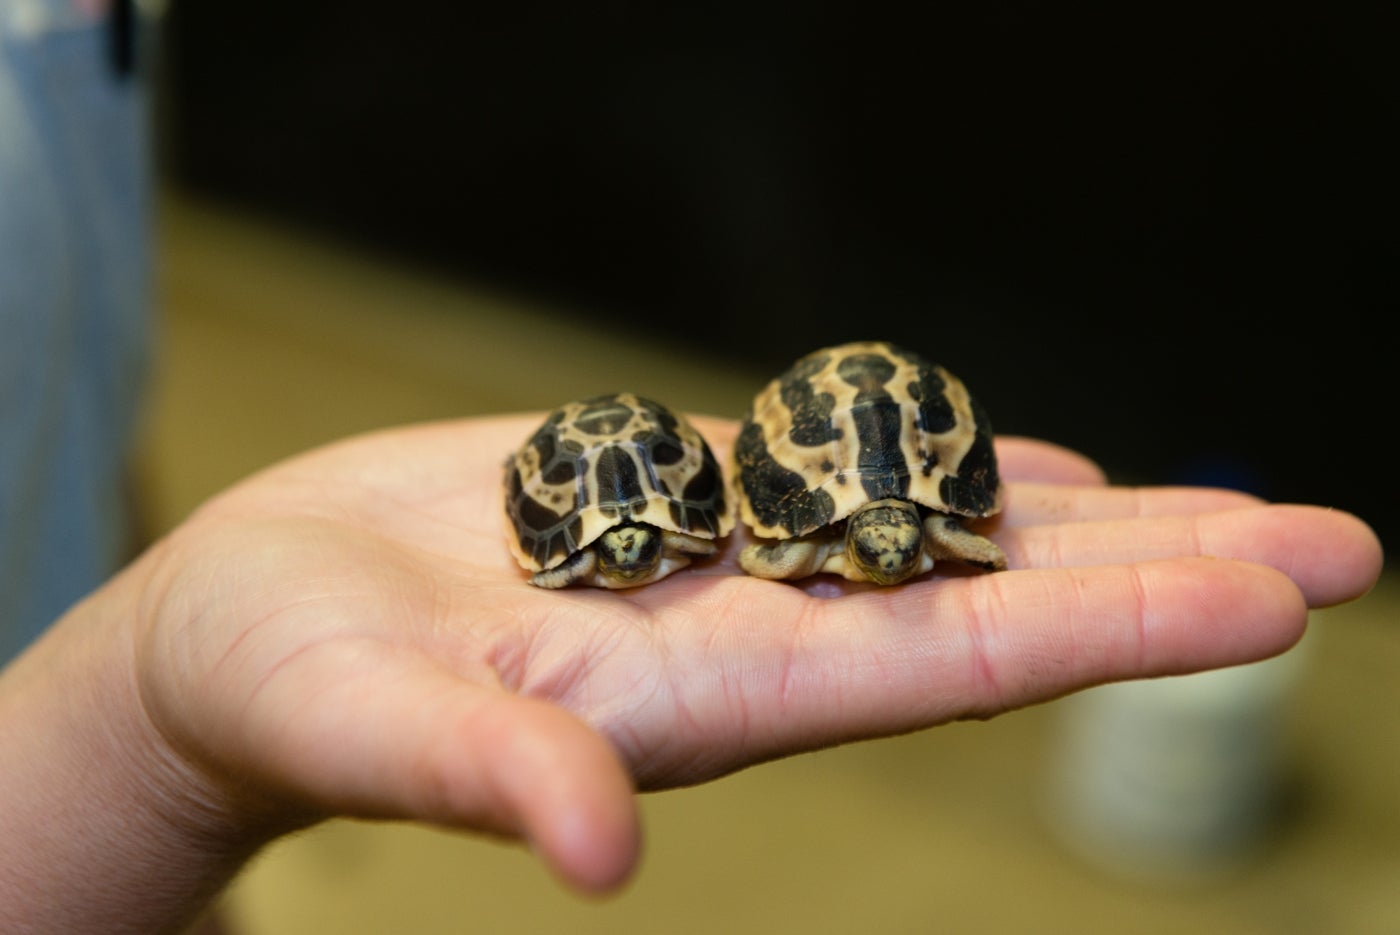 These two spider tortoises are the half-siblings of the one that hatched in July 2020. They have the same mother, but different fathers.